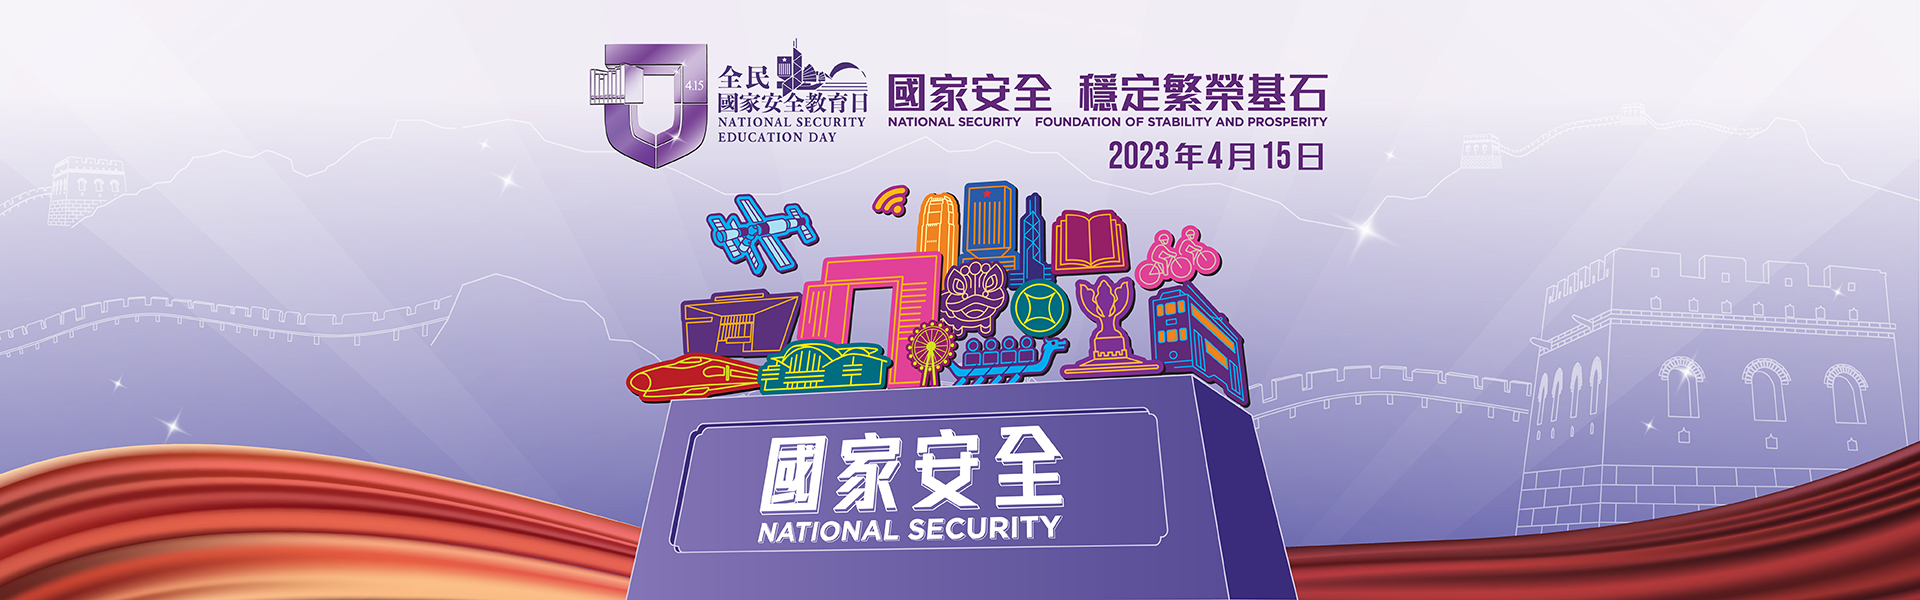 Banner - National Security Education Day